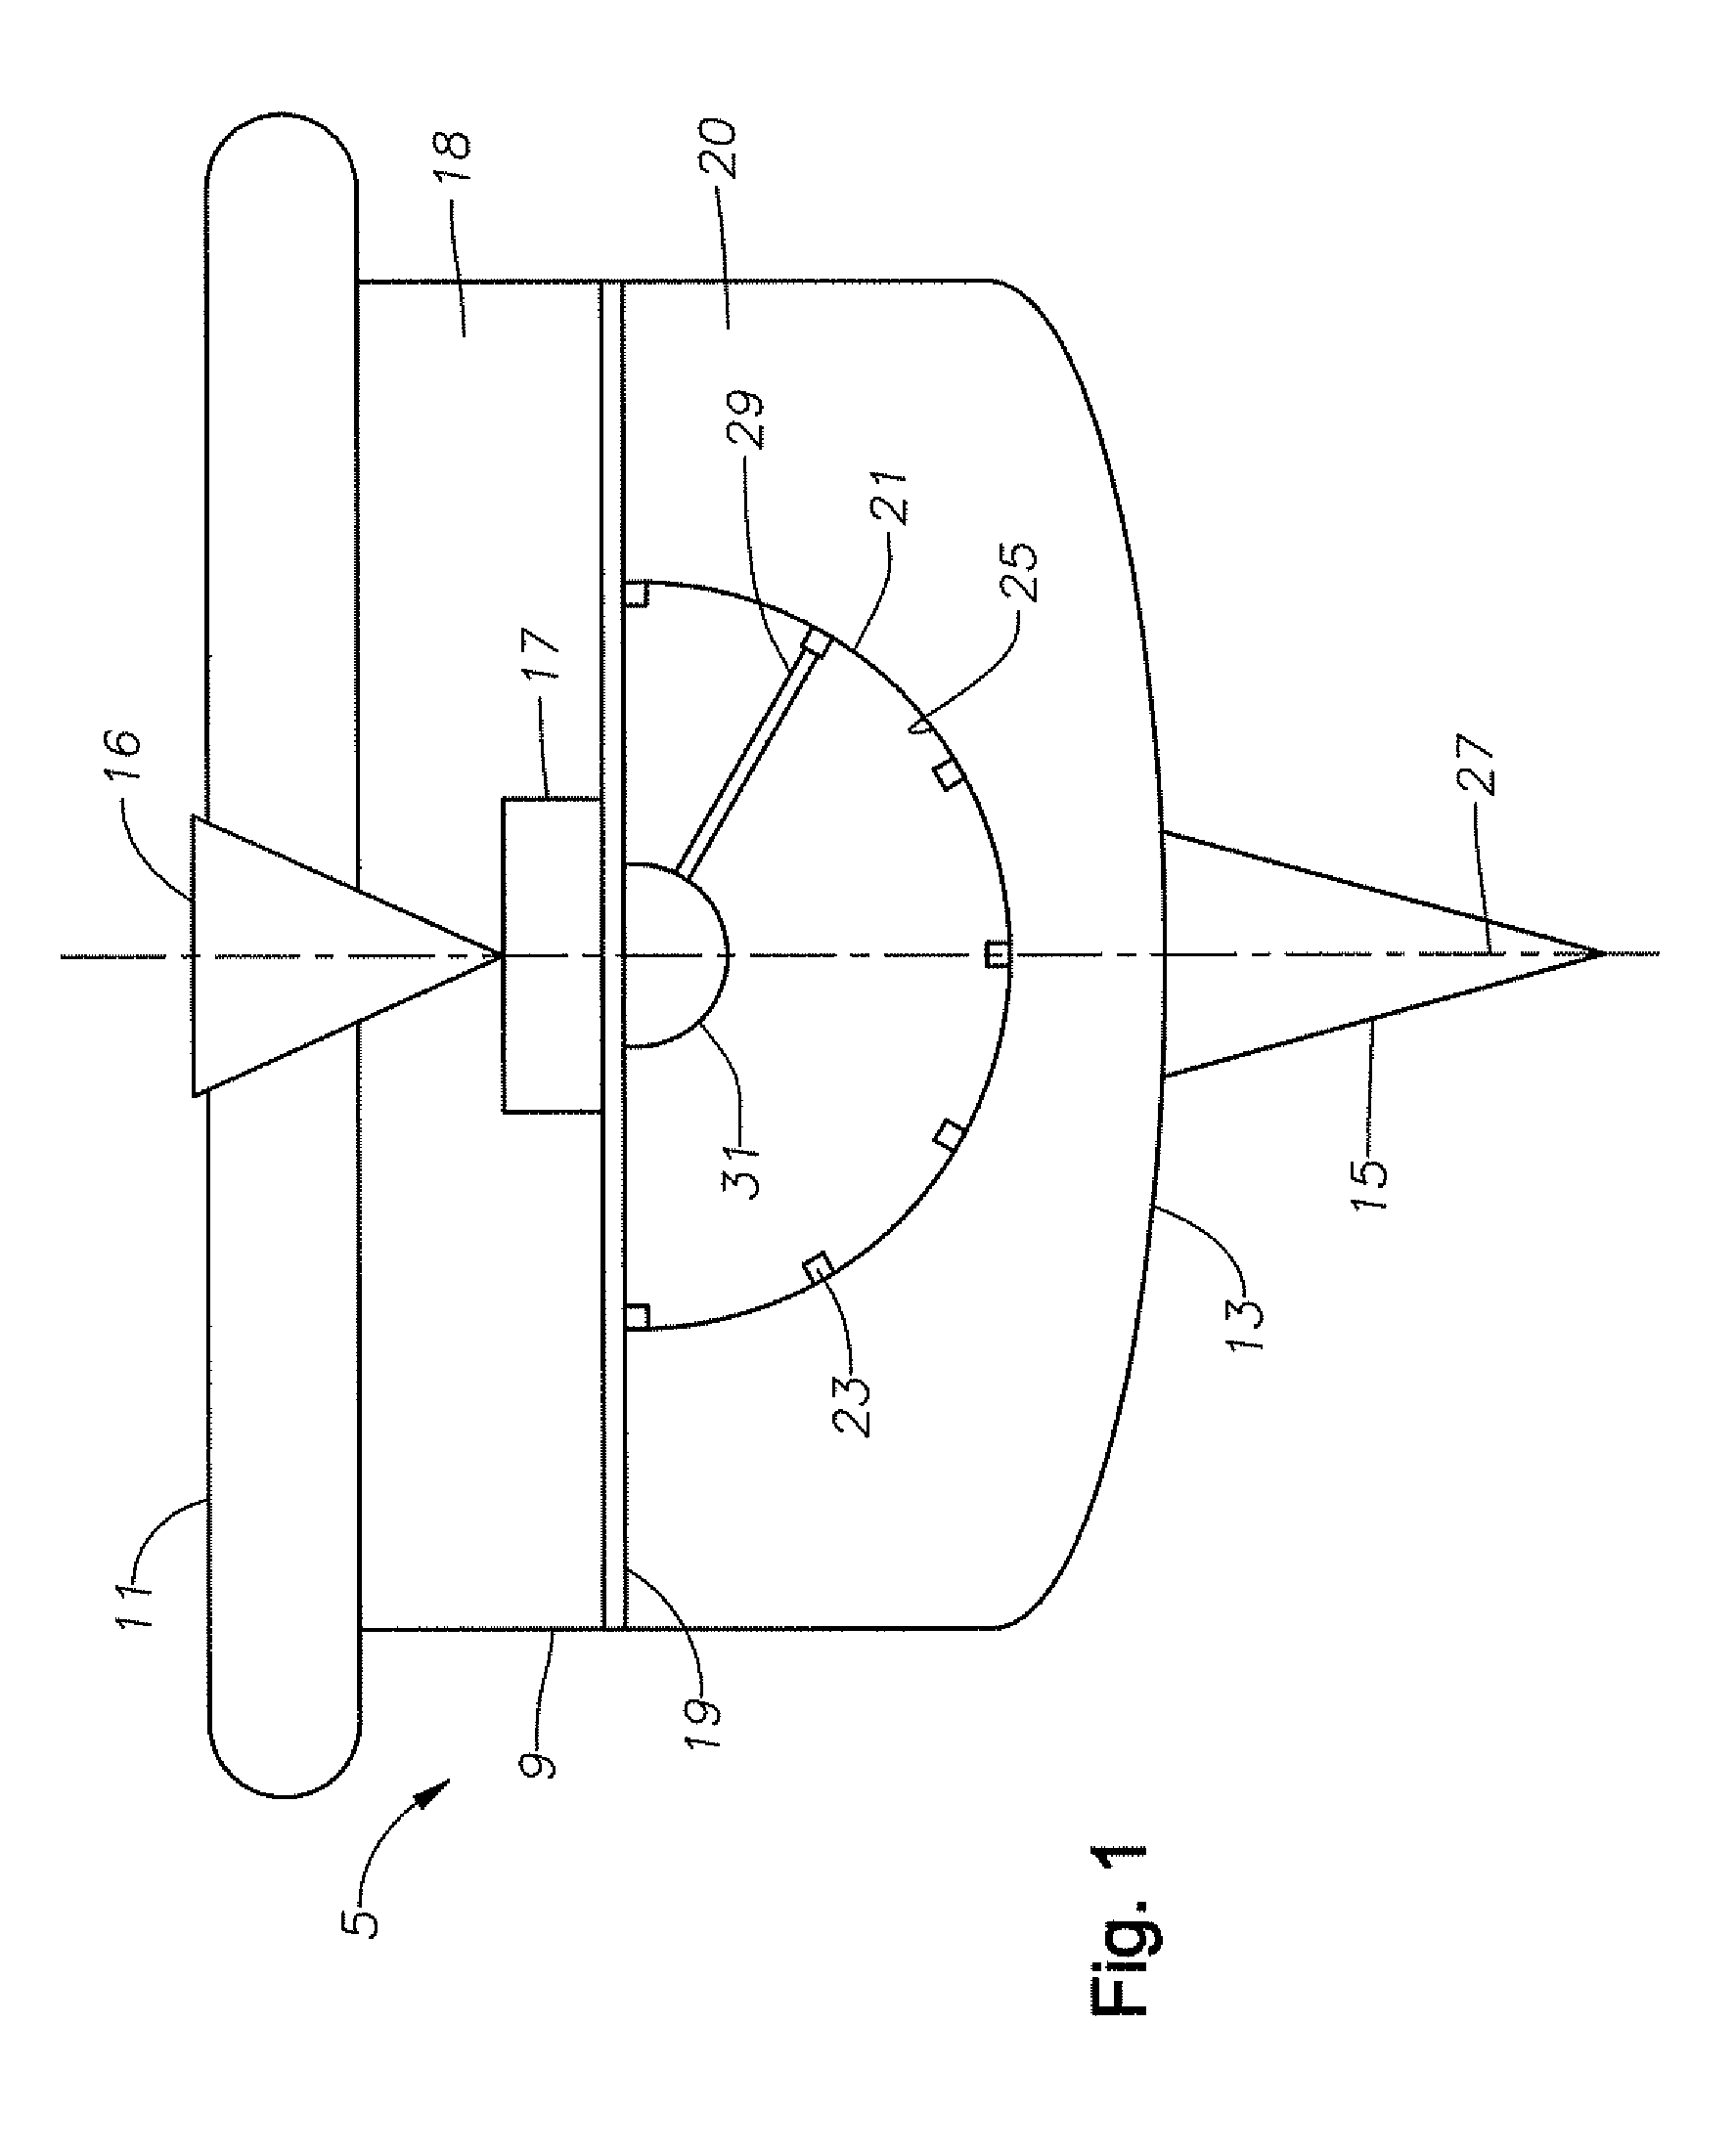 Steering and fixed angle geophone